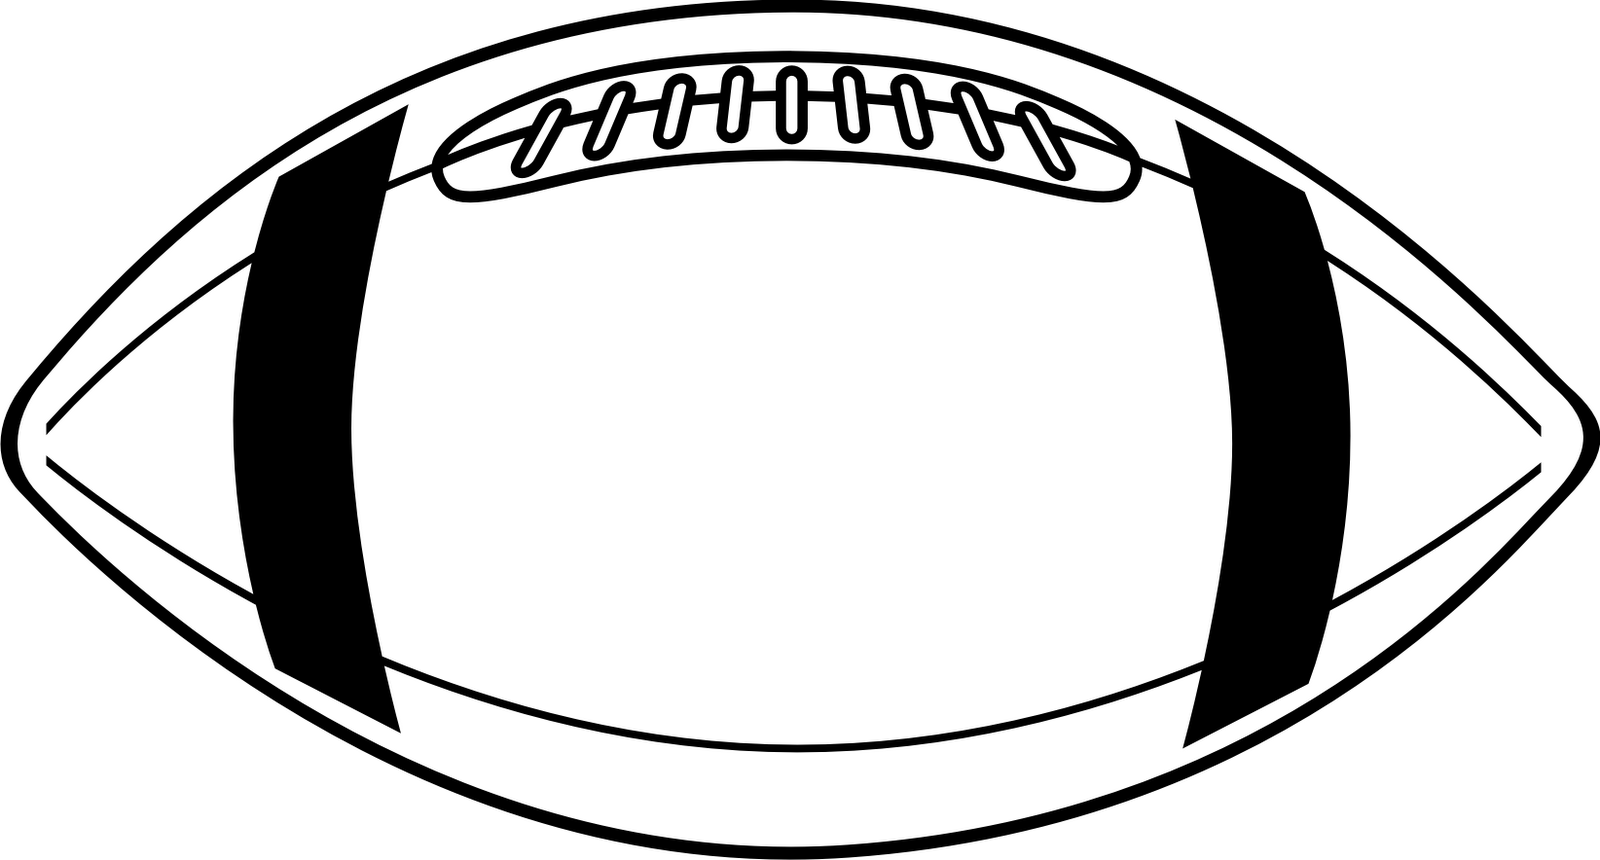 American Football Clipart Black And White - Free ...